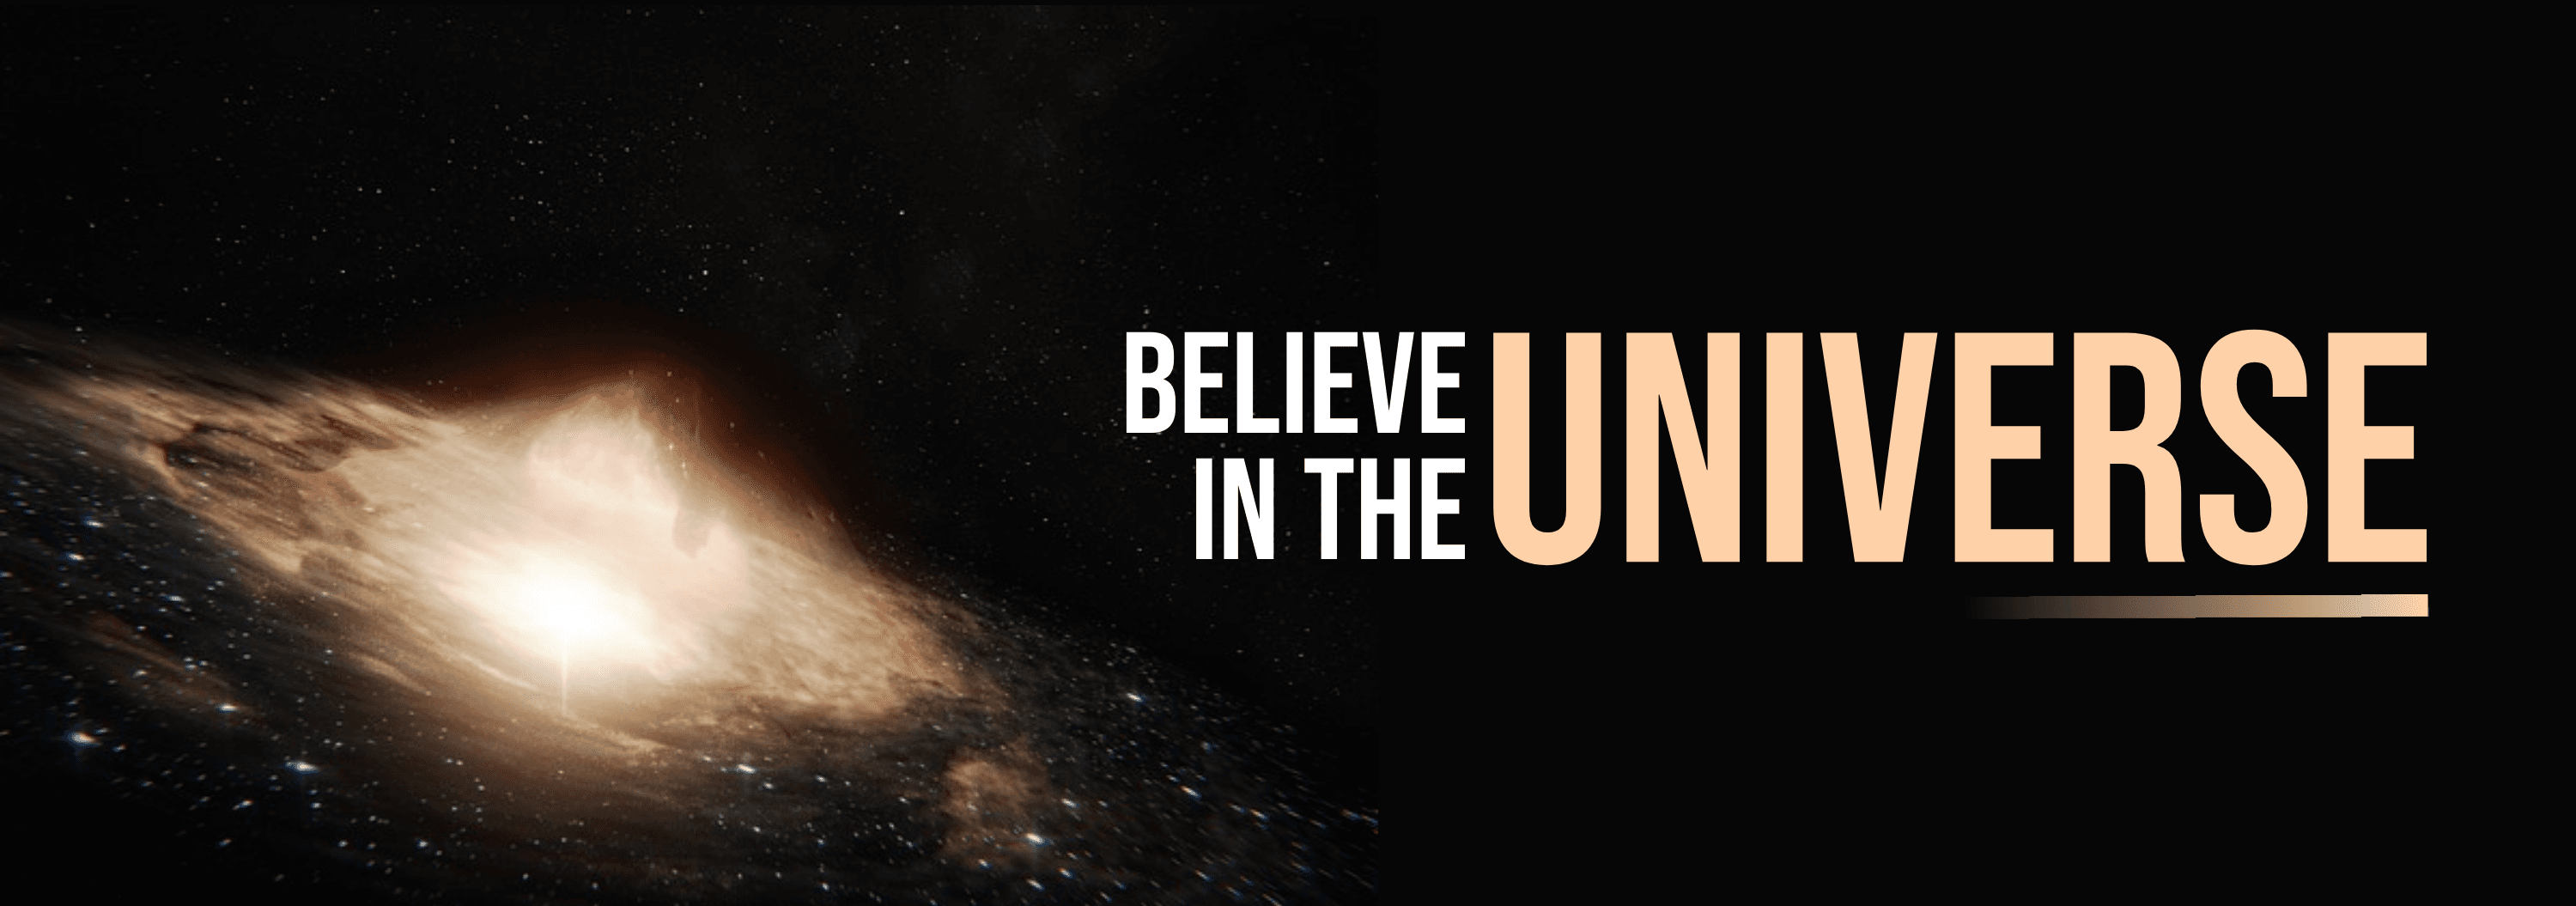 space-background-believe-in-the-universe-tumblr-banner-template-thumbnail-img